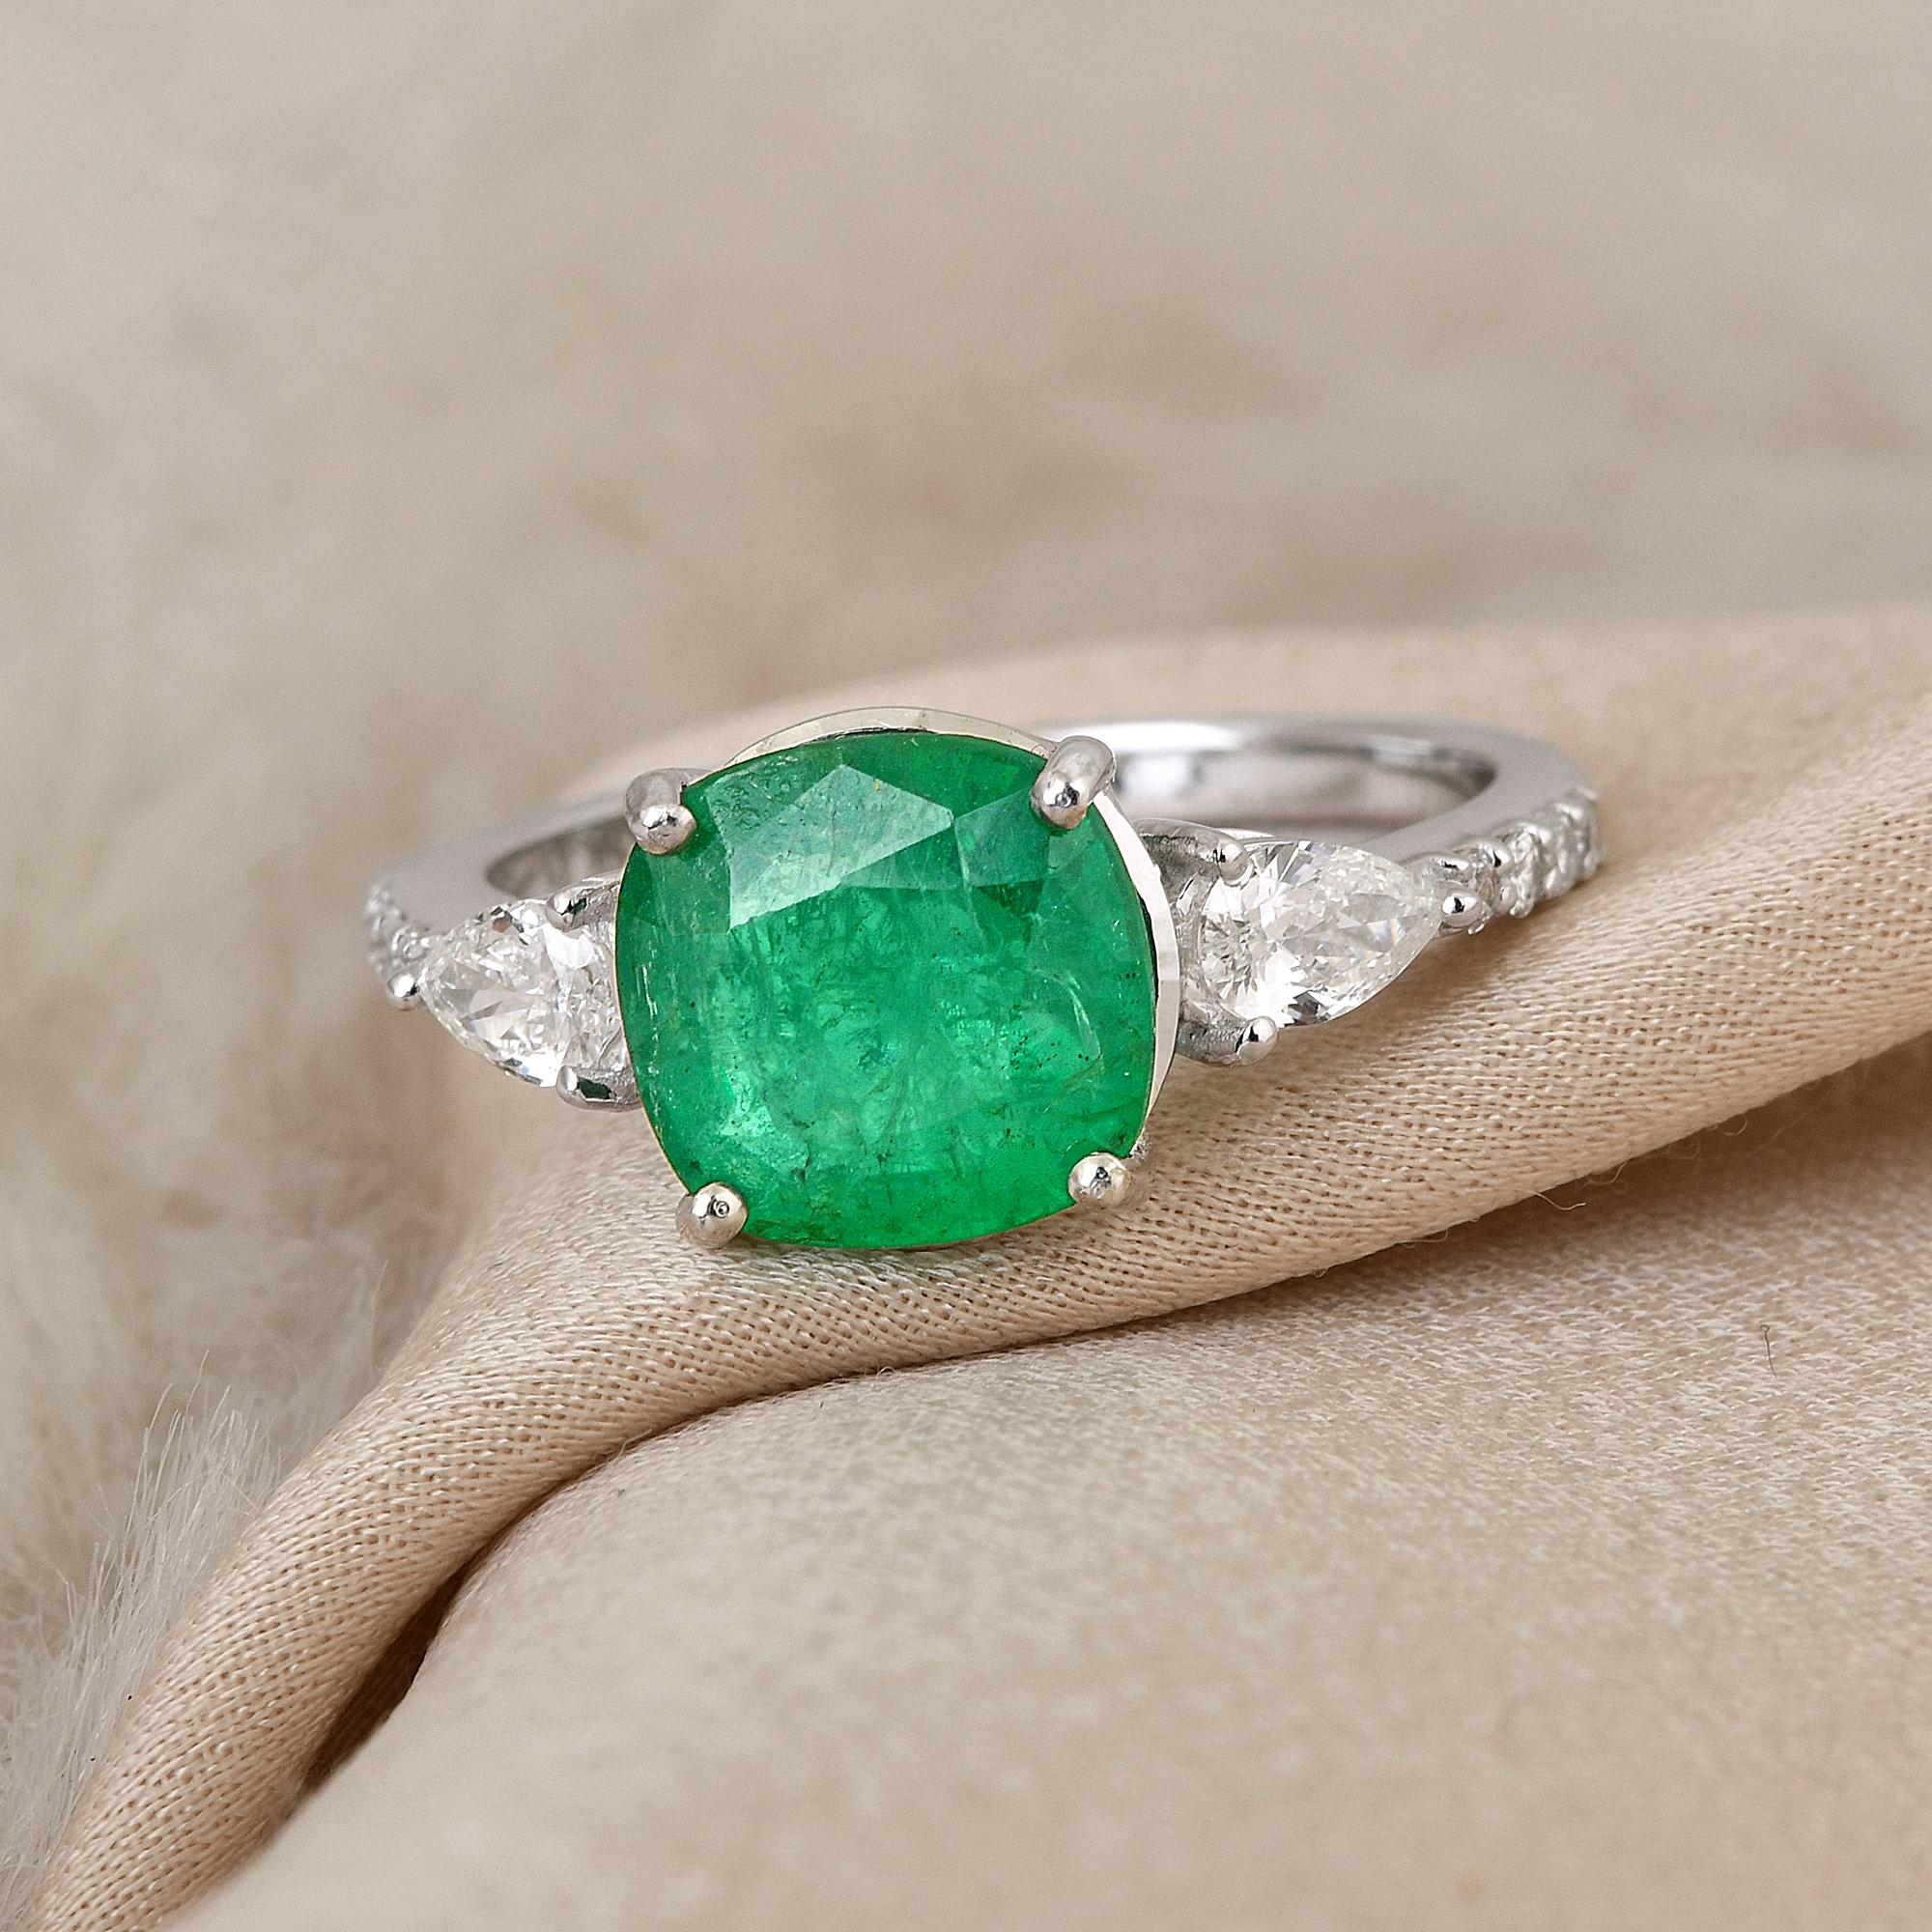 For Sale:  Natural Emerald Cocktail Ring Pear Diamond Solid 18k White Gold Handmade Jewelry 3